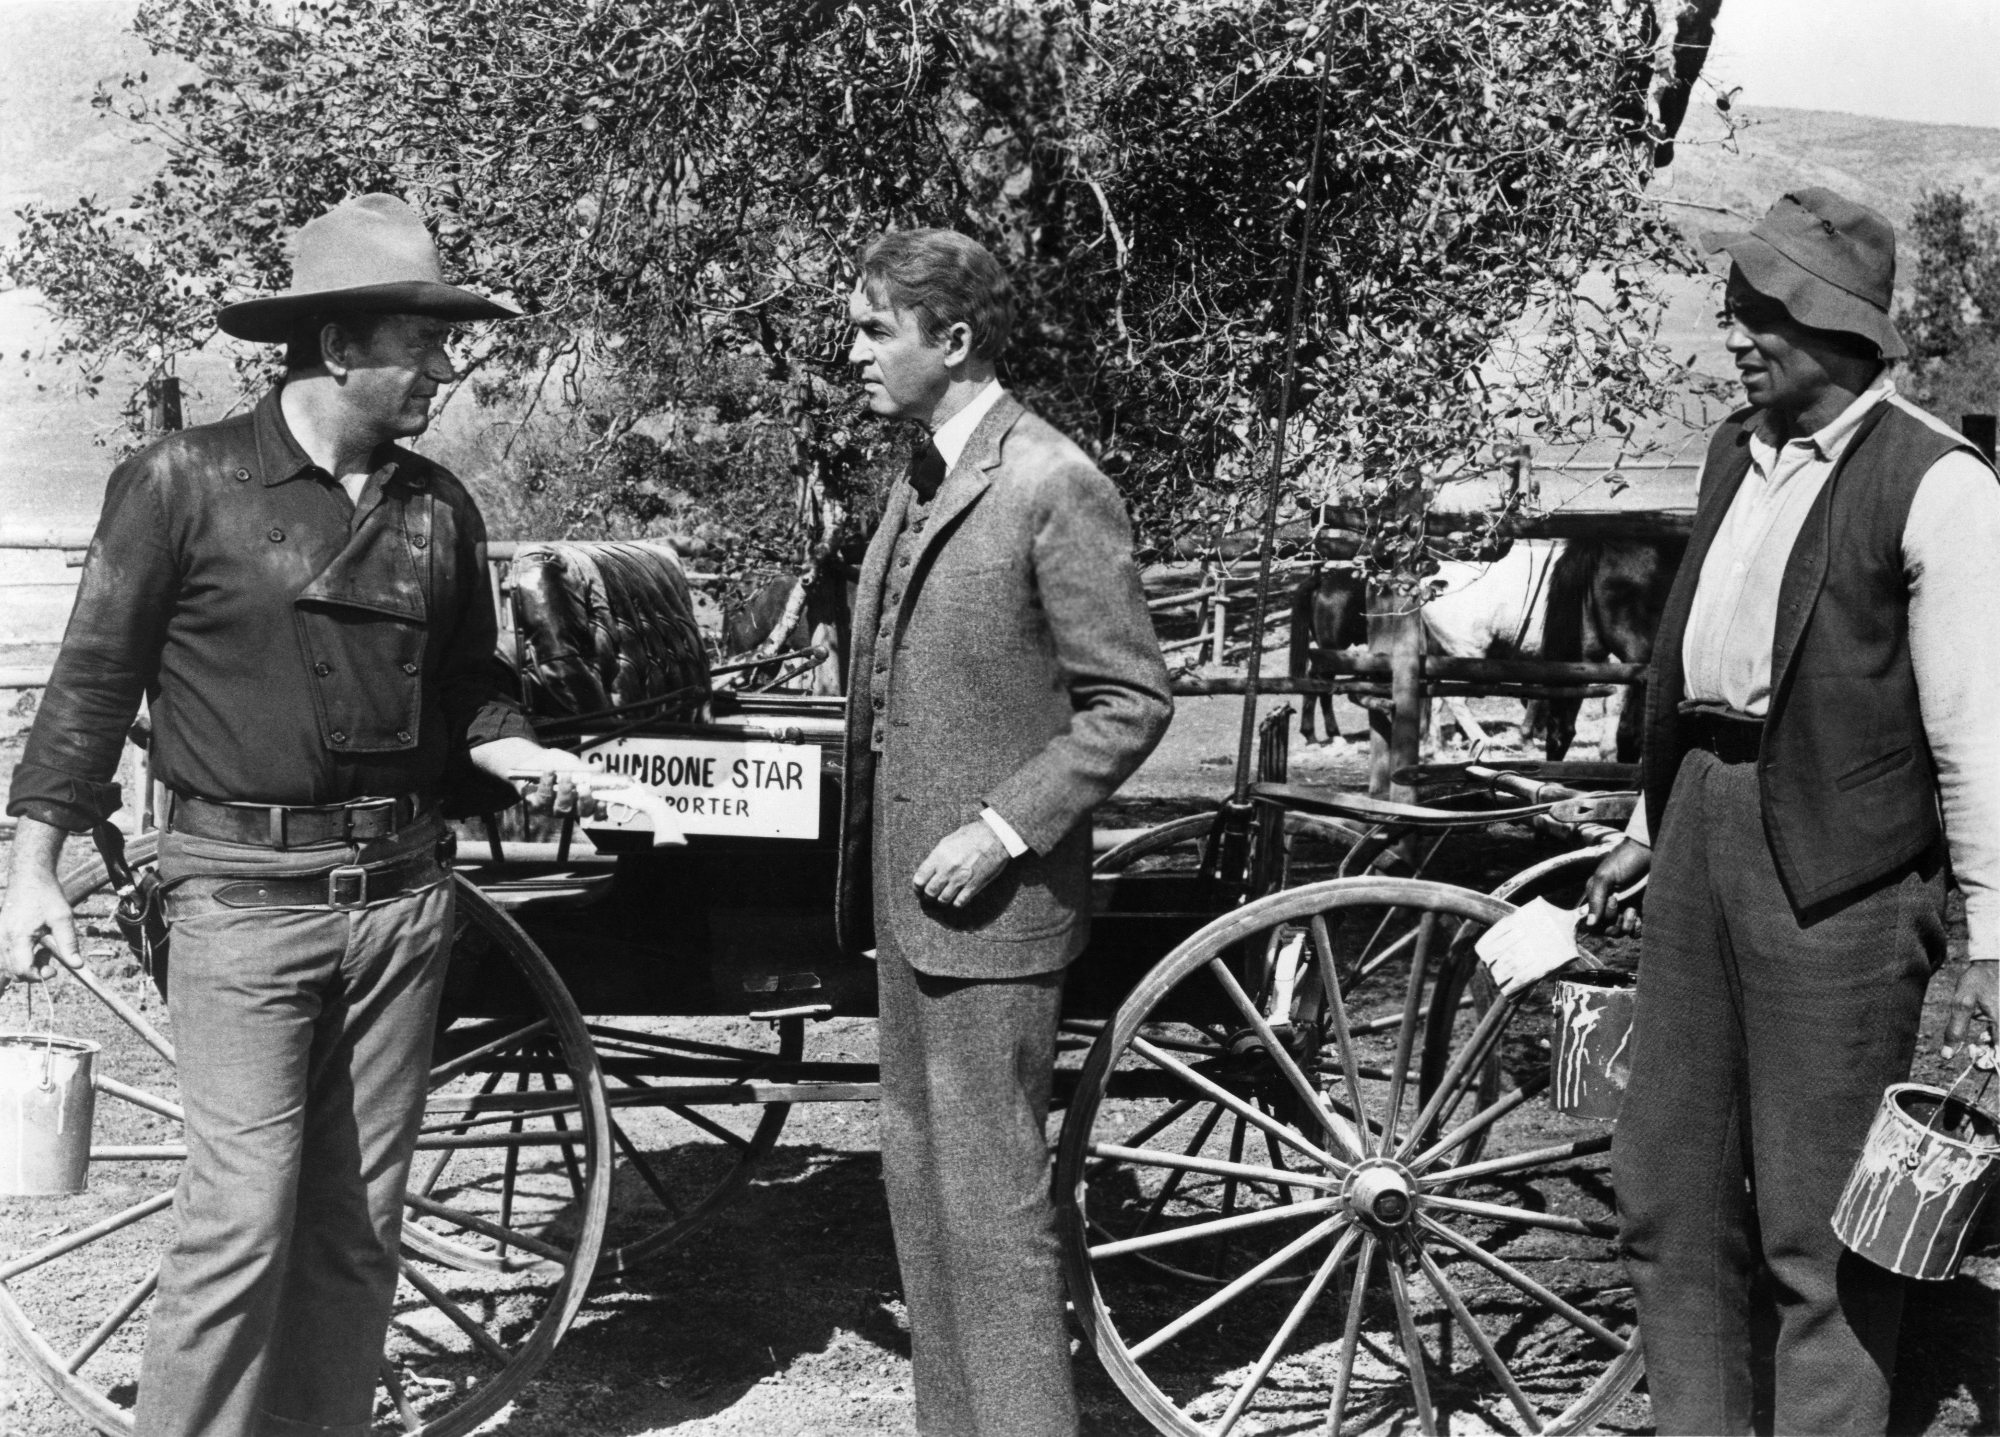 'The Man Who Shot Liberty Valance' John Wayne as Tom Doniphon, James Stewart as Ransom Stoddard, and Woody Strode as Pompey standing in front of a wagon looking at each other in Western costumes